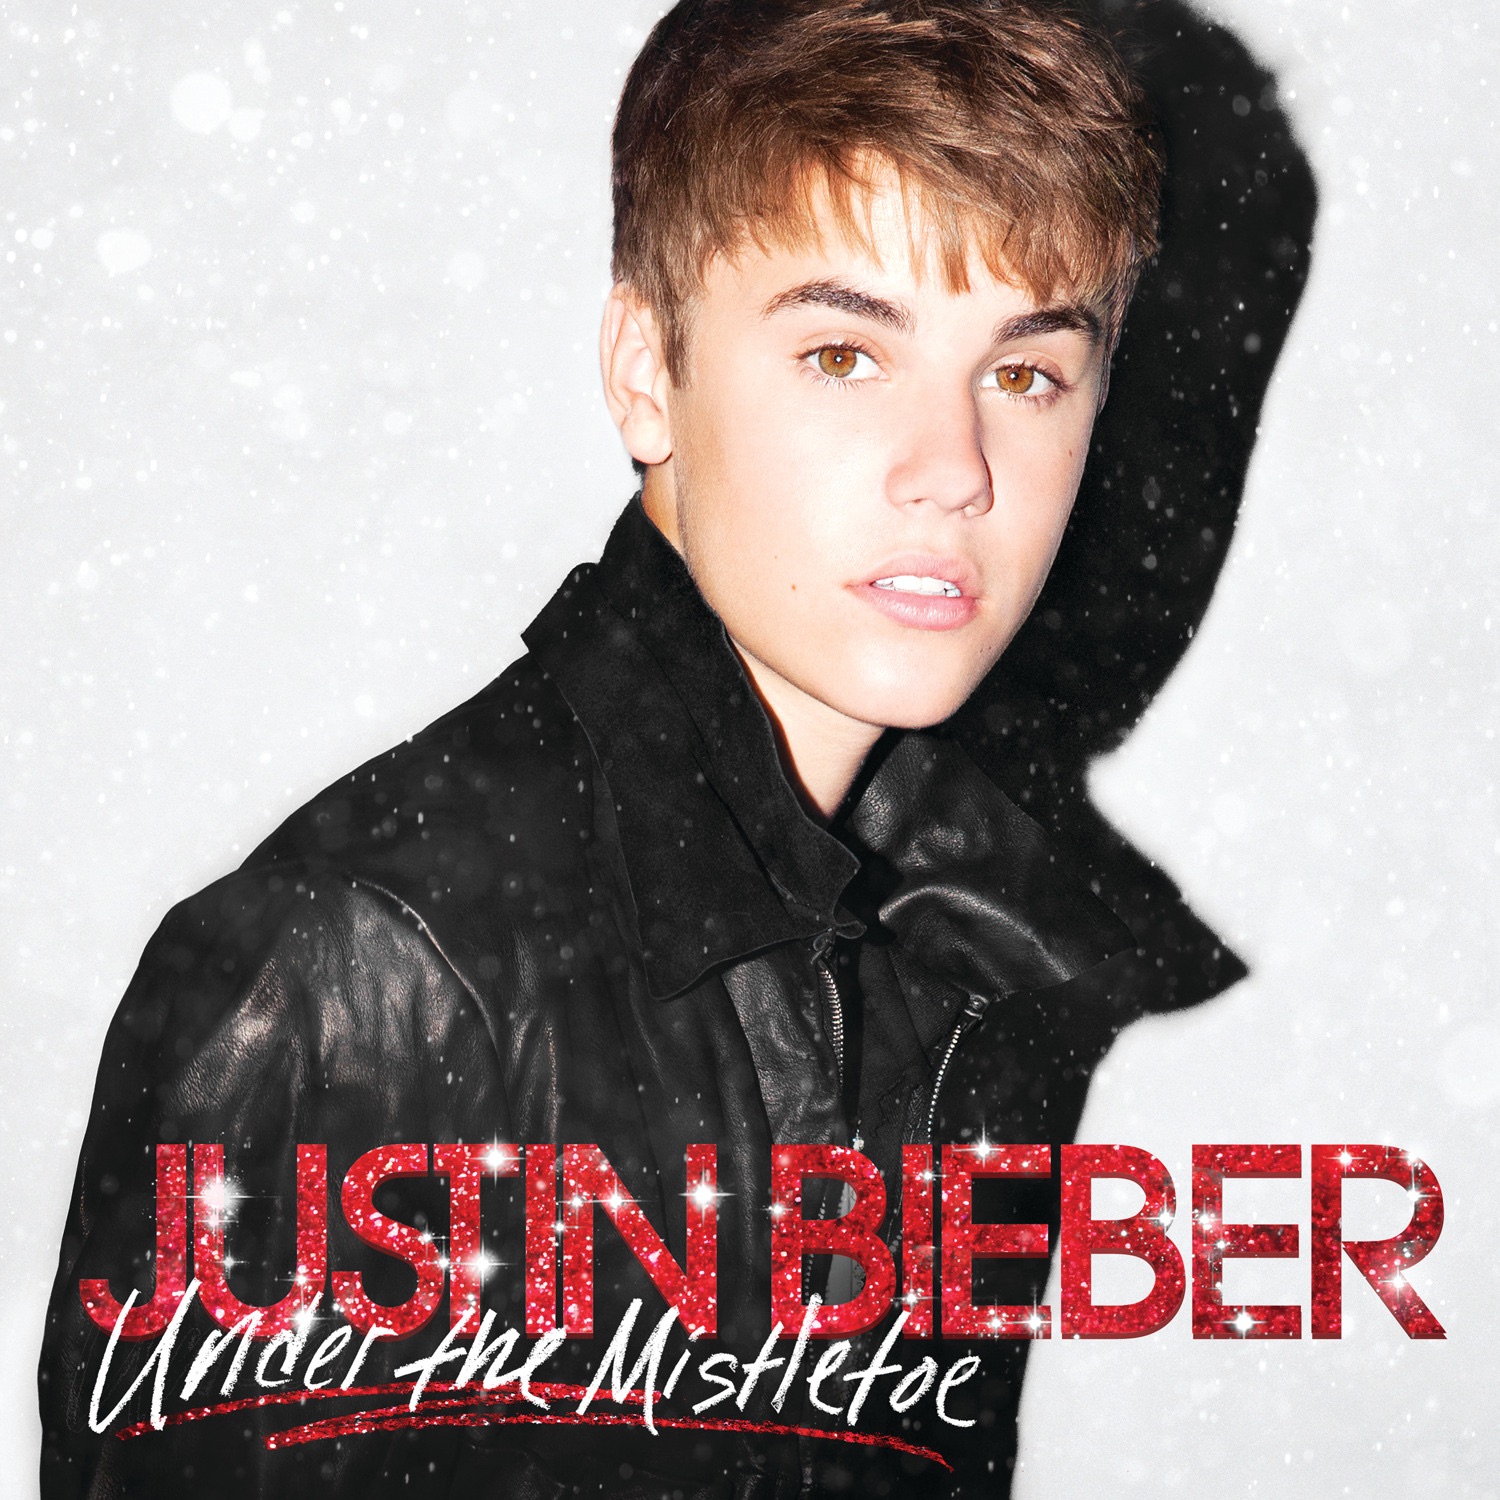 Justin Bieber — Santa Claus Is Coming To Town cover artwork